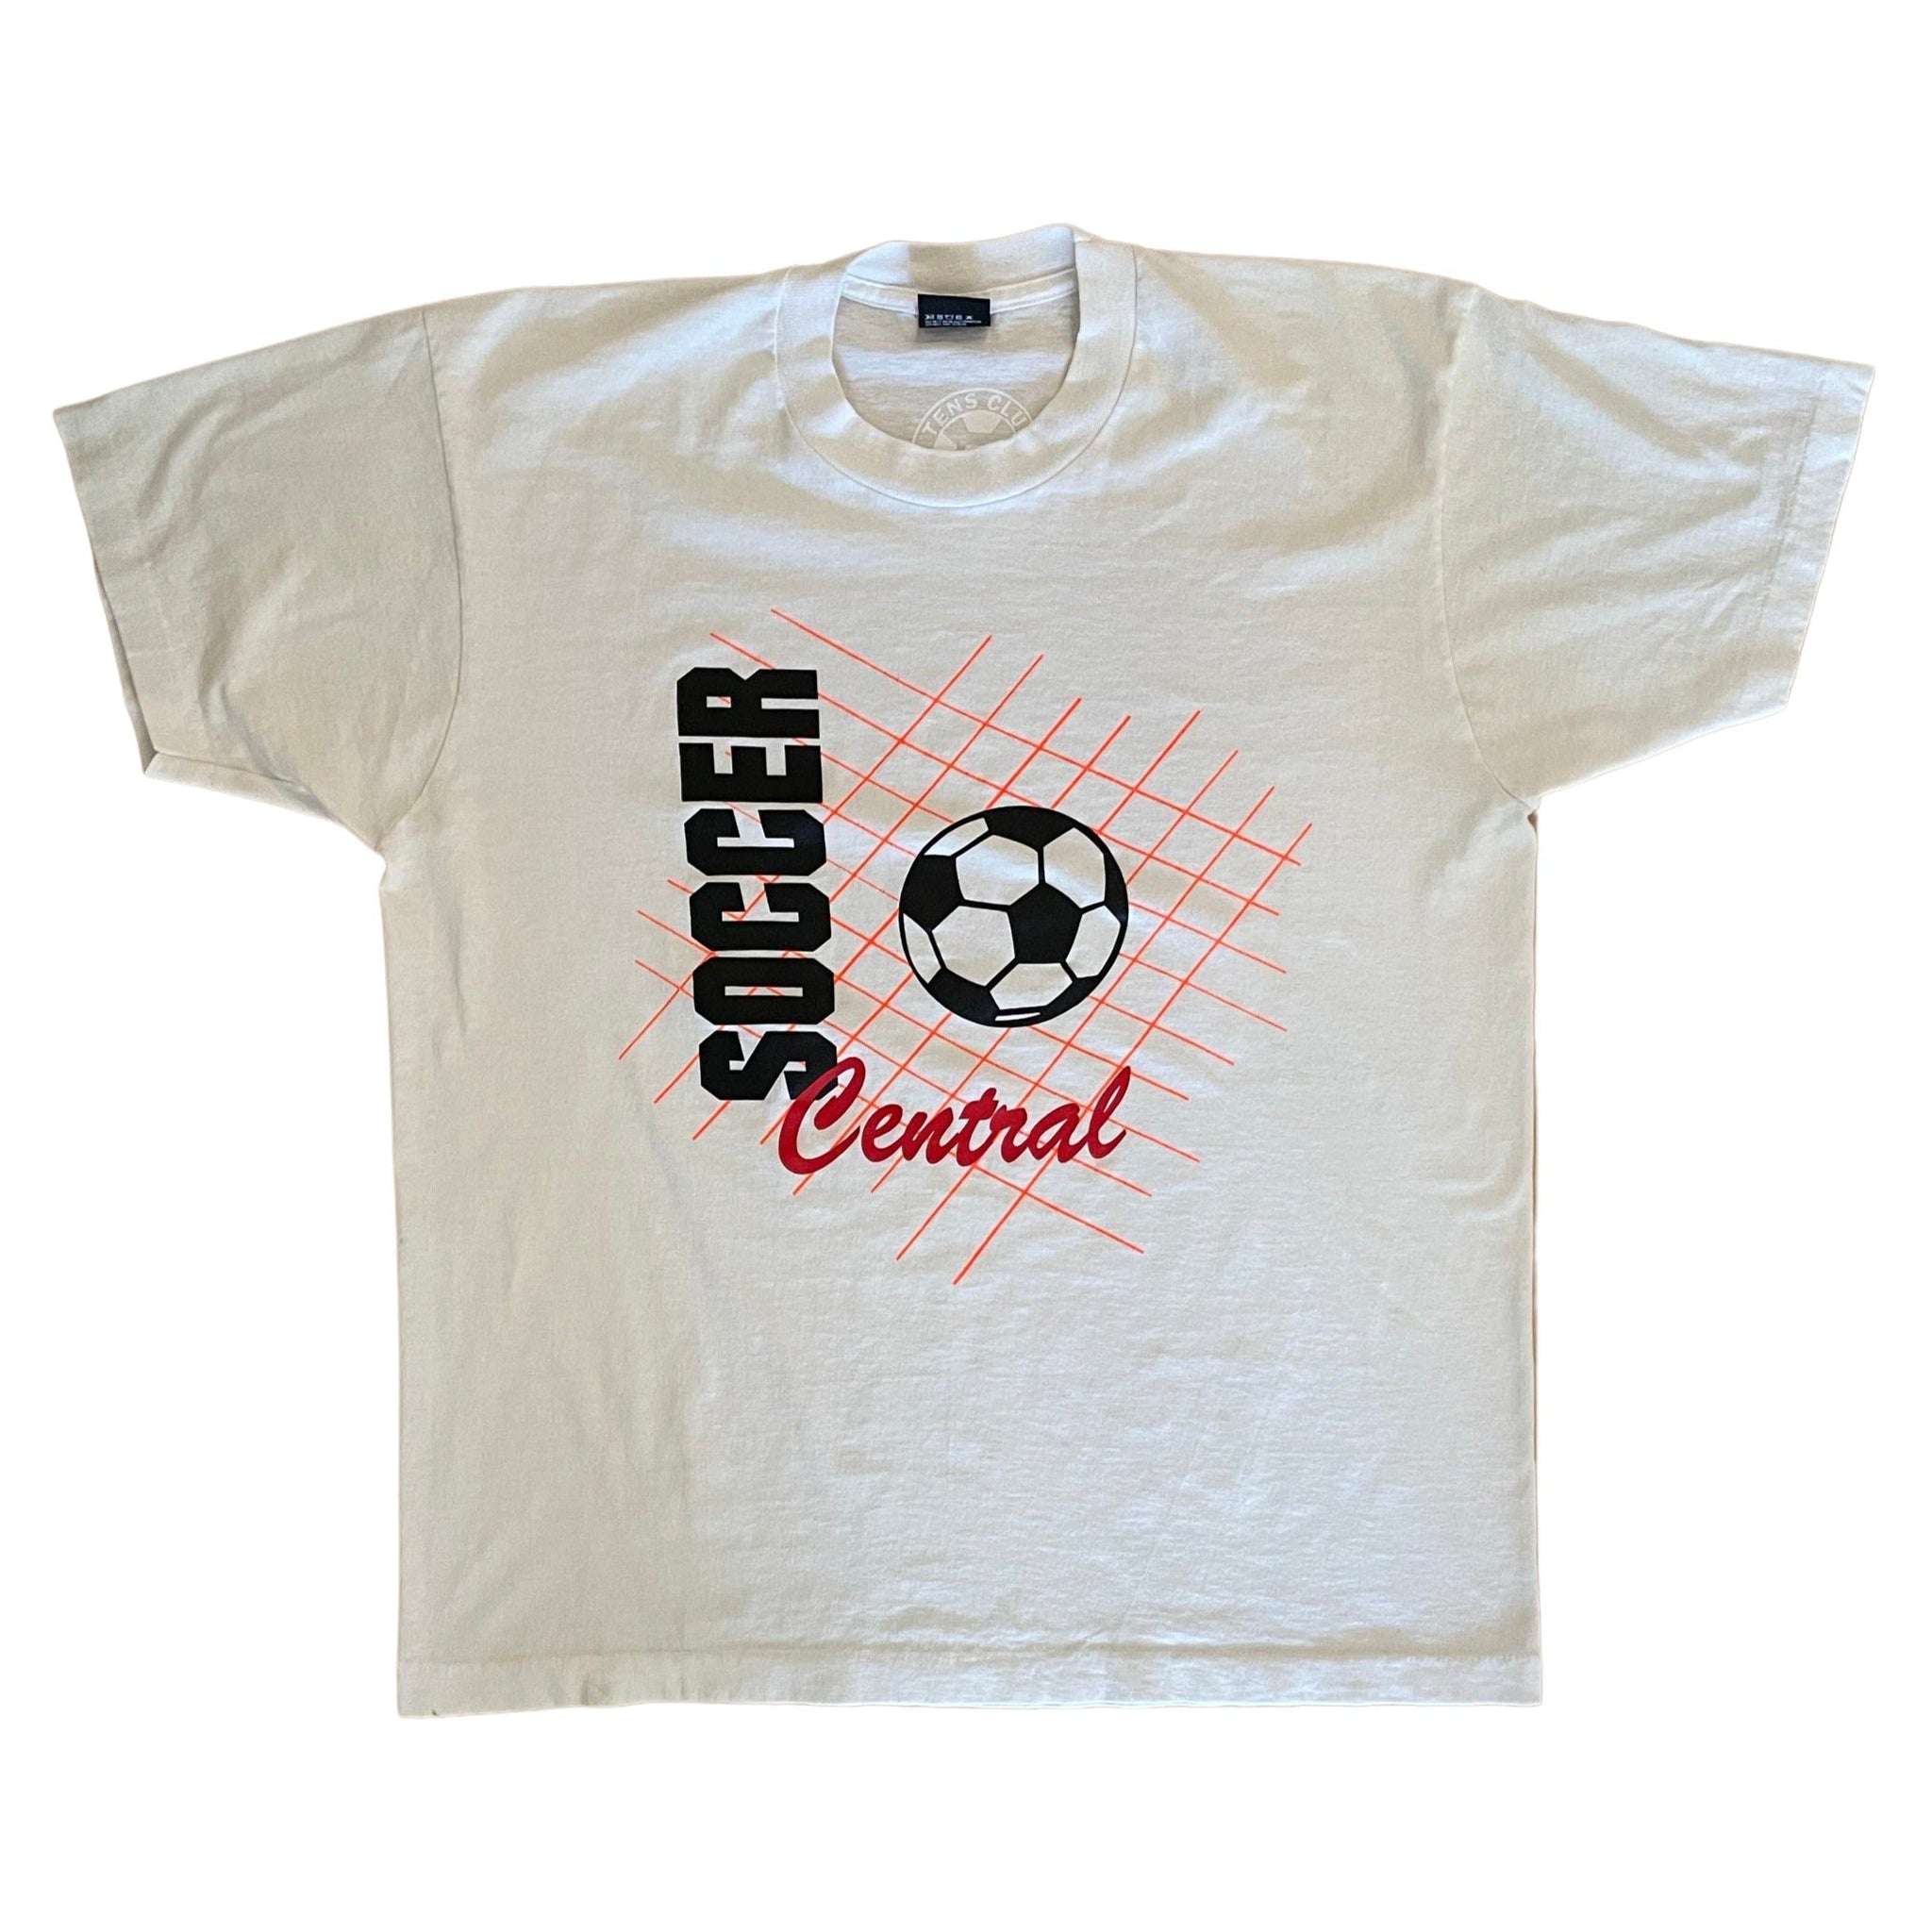 Soccer Central Graphic T-Shirt - L